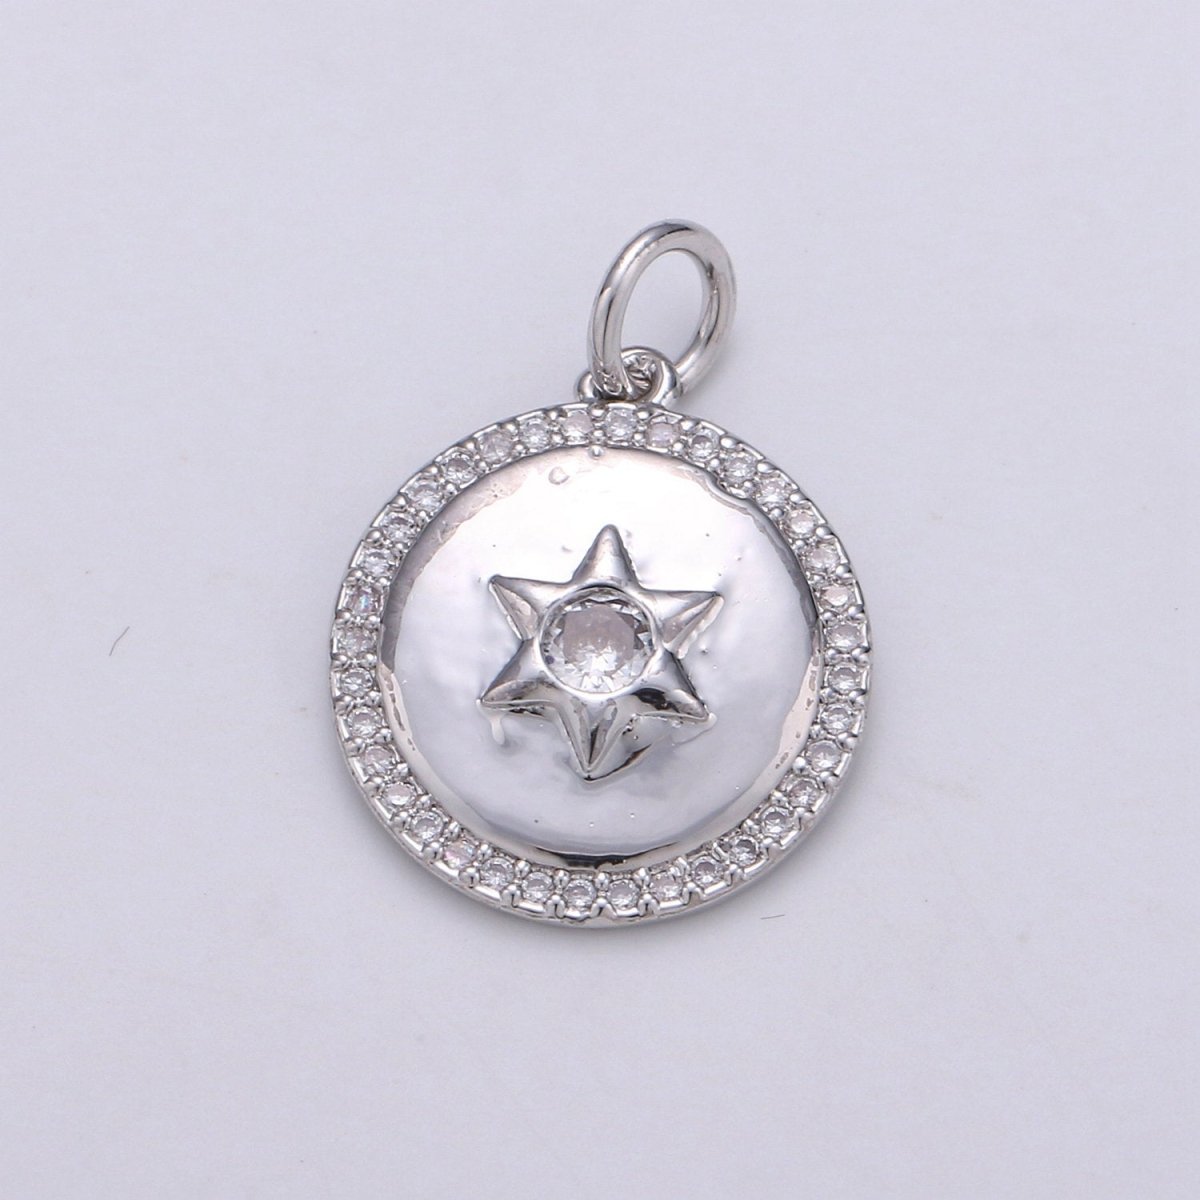 Micro Pave Celestial Jewelry Gold Star Charm Jewelry Making Supply 24K Gold Filled Findings D-407 D-408 - DLUXCA